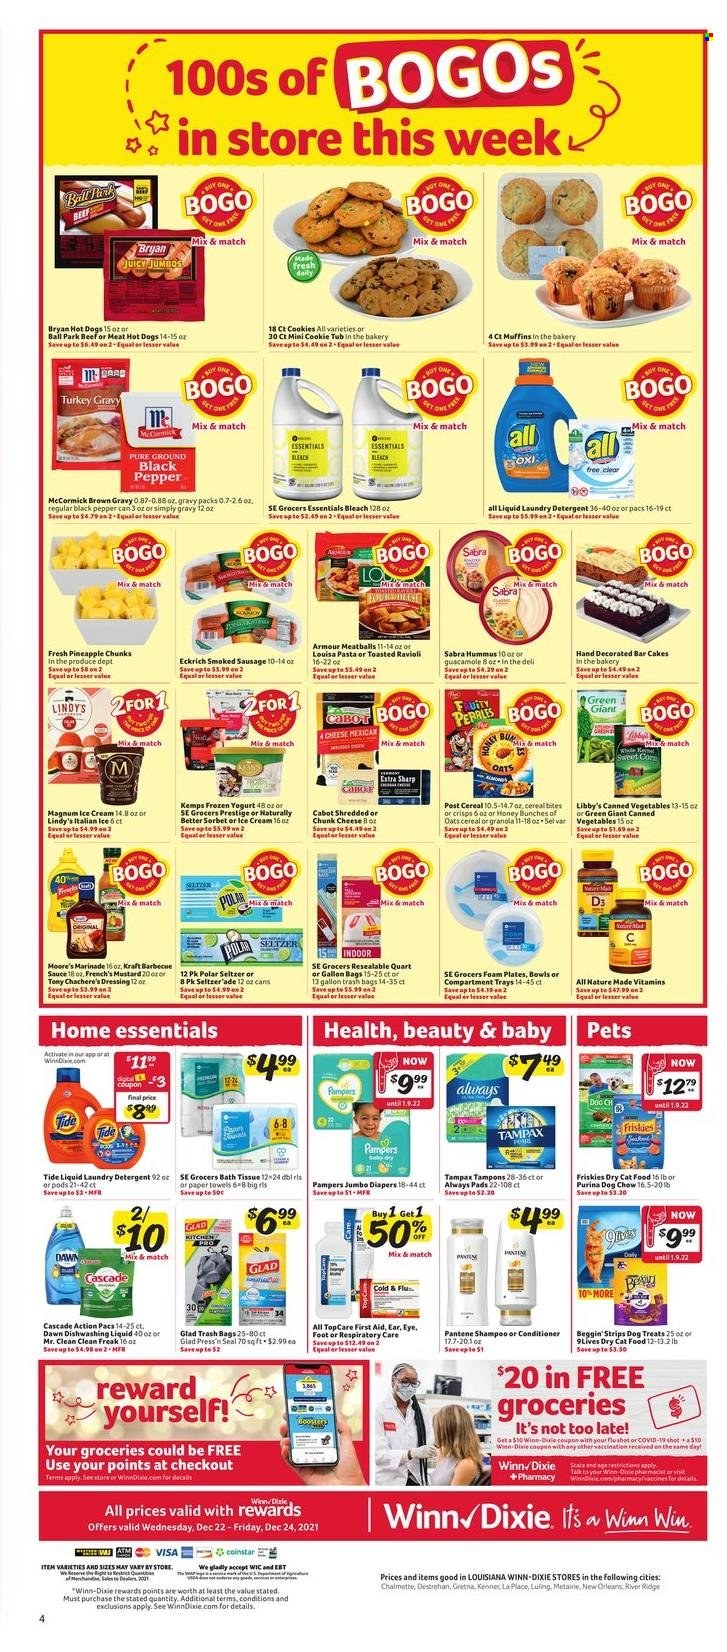 thumbnail - Winn Dixie Flyer - 12/22/2021 - 12/28/2021 - Sales products - cake, muffin, corn, sweet corn, pineapple, ravioli, hot dog, meatballs, sauce, Kraft®, Bryan, sausage, smoked sausage, hummus, guacamole, chunk cheese, Kemps, yoghurt, Magnum, ice cream, strips, cookies, oats, canned vegetables, cereals, granola, gravy mix, black pepper, BBQ sauce, mustard, turkey gravy, dressing, marinade, seltzer water, Pampers, nappies, bath tissue, kitchen towels, paper towels, detergent, bleach, Cascade, Tide, laundry detergent, dishwashing liquid, shampoo, Tampax, Always pads, tampons, conditioner, Pantene, bag, trash bags, plate, Sharp, foam plates, animal food, cat food, Dog Chow, Purina, 9lives, dry cat food, Beggin', Friskies, Cold & Flu, Nature Made, vitamin D3. Page 9.